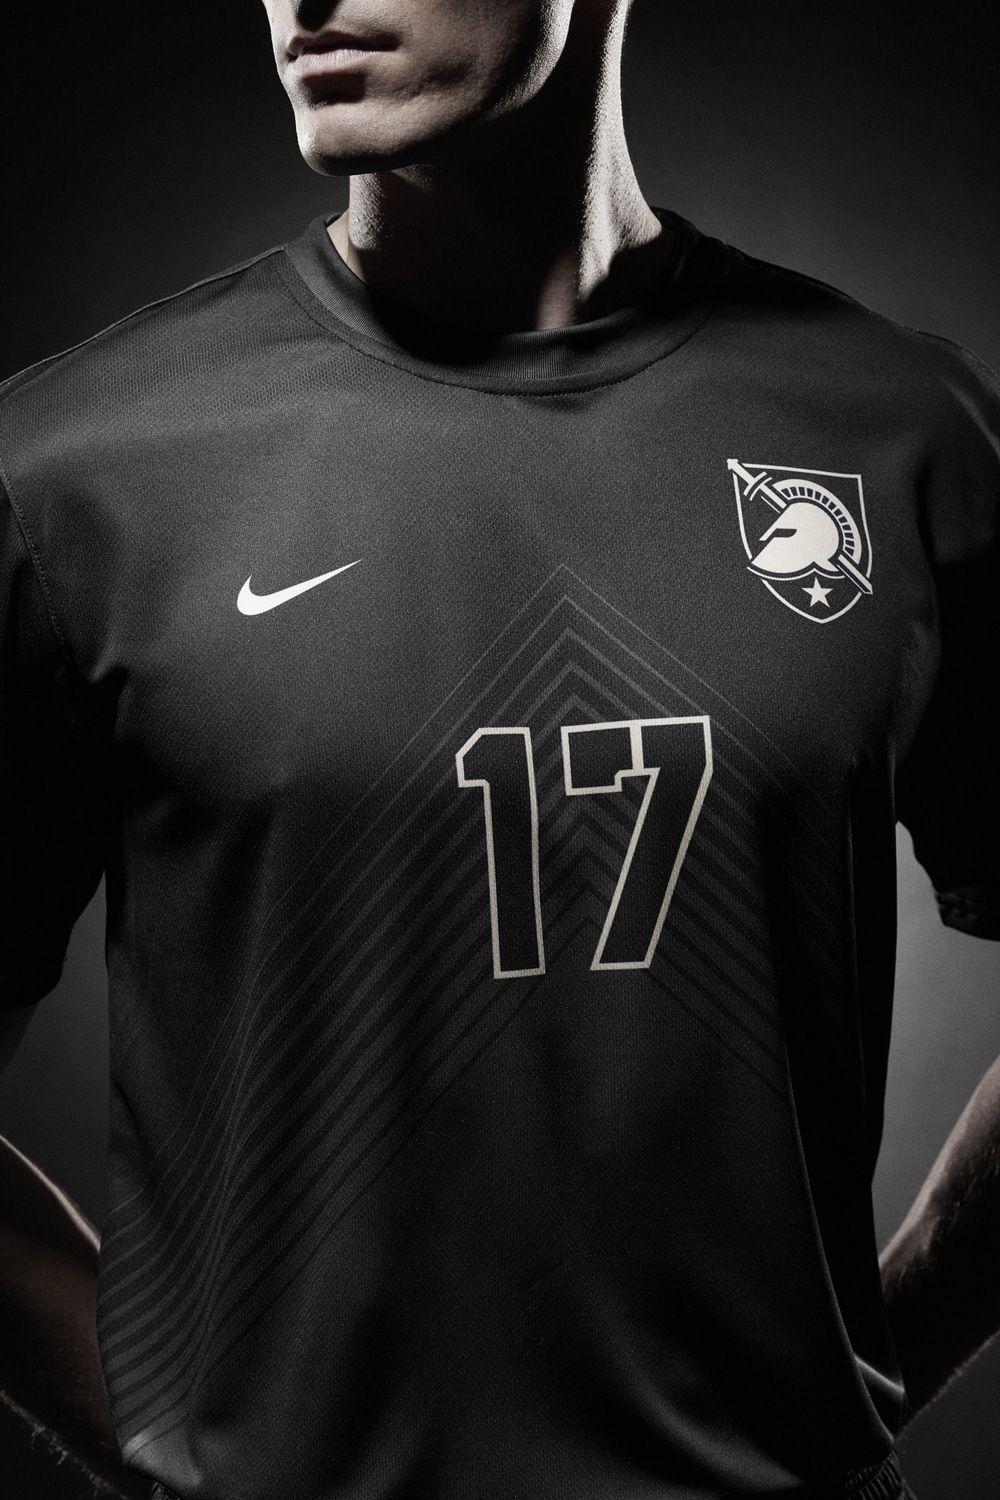 Nike Army Logo - New Logo and Uniforms for Army West Point Athletics by Nike ...